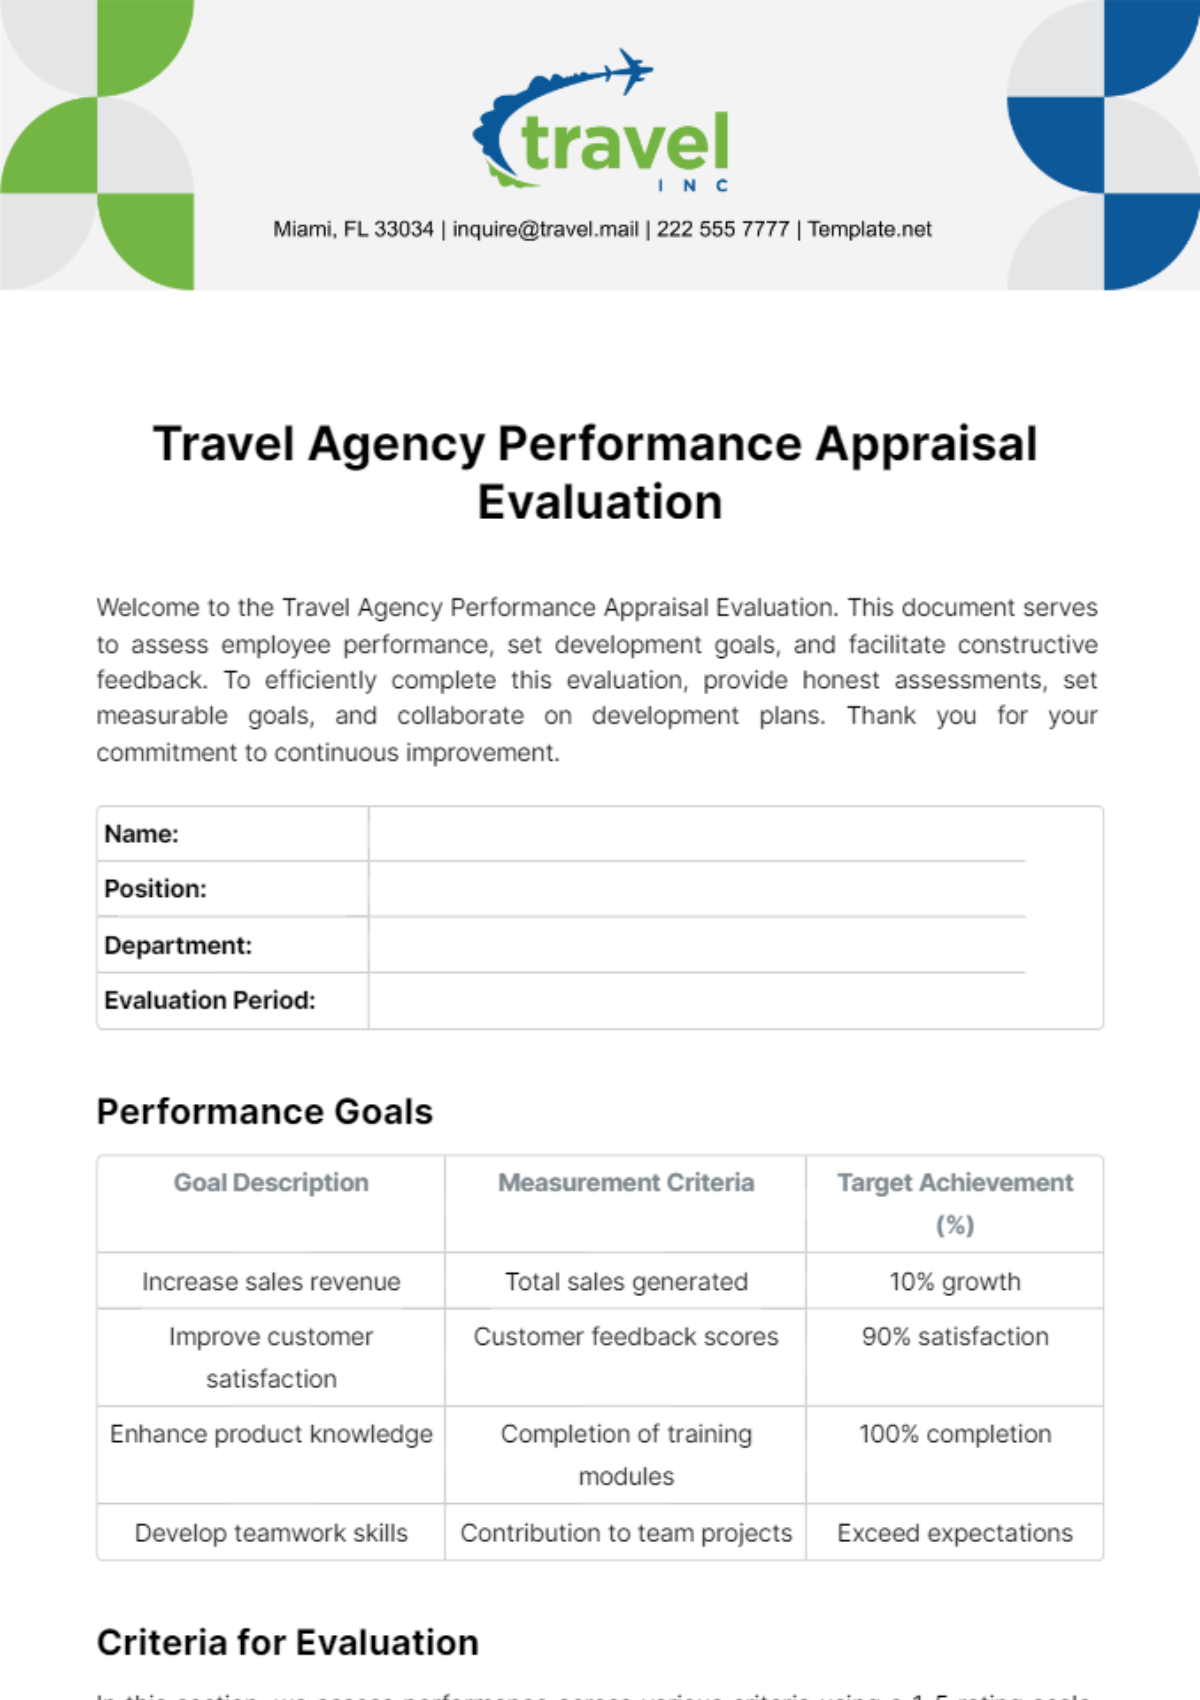 Free Travel Agency Performance Appraisal Evaluation Template